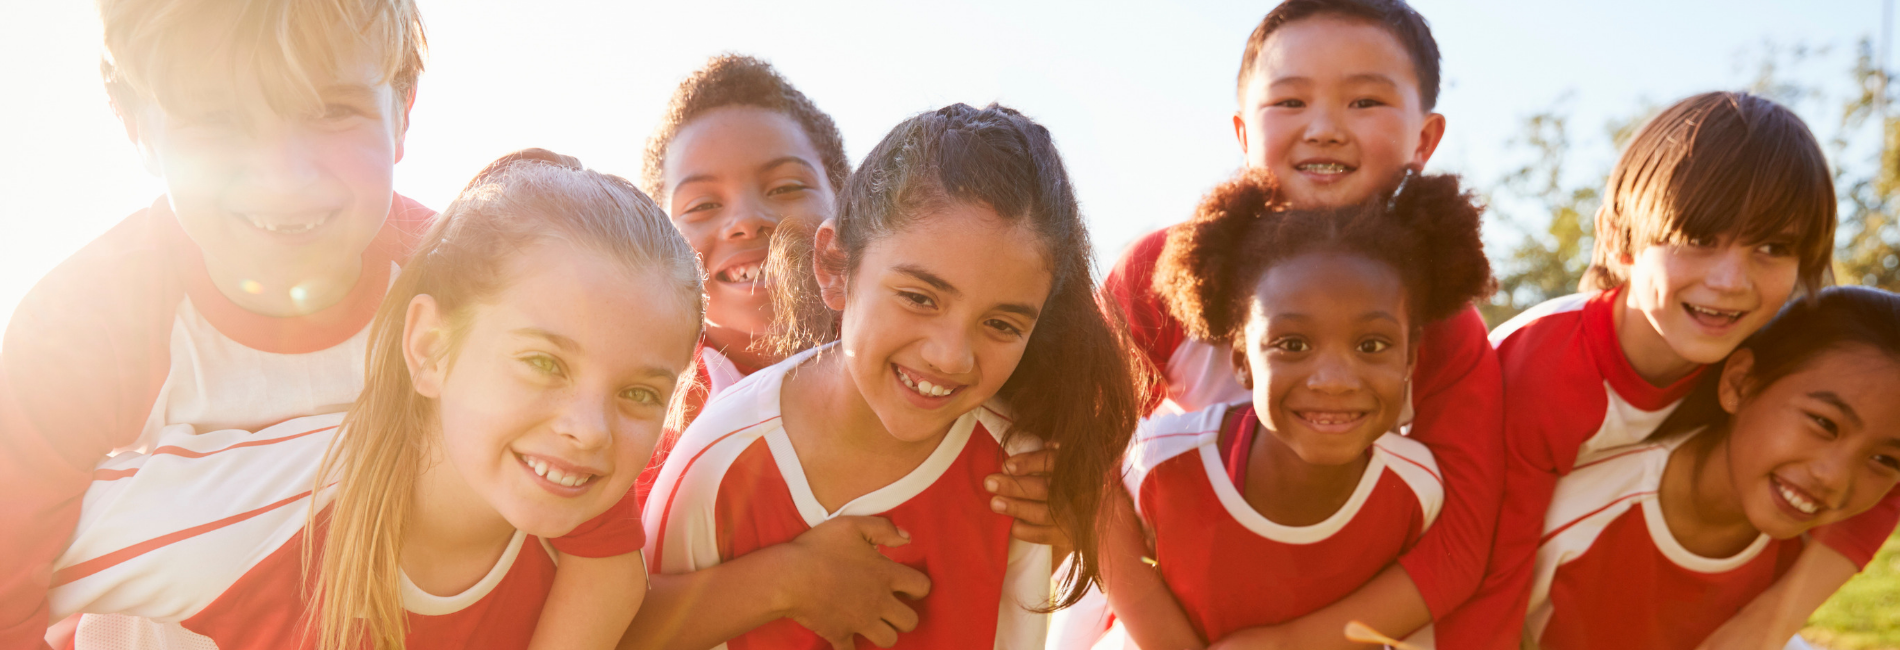 Benefits Of Team Sports For Kids